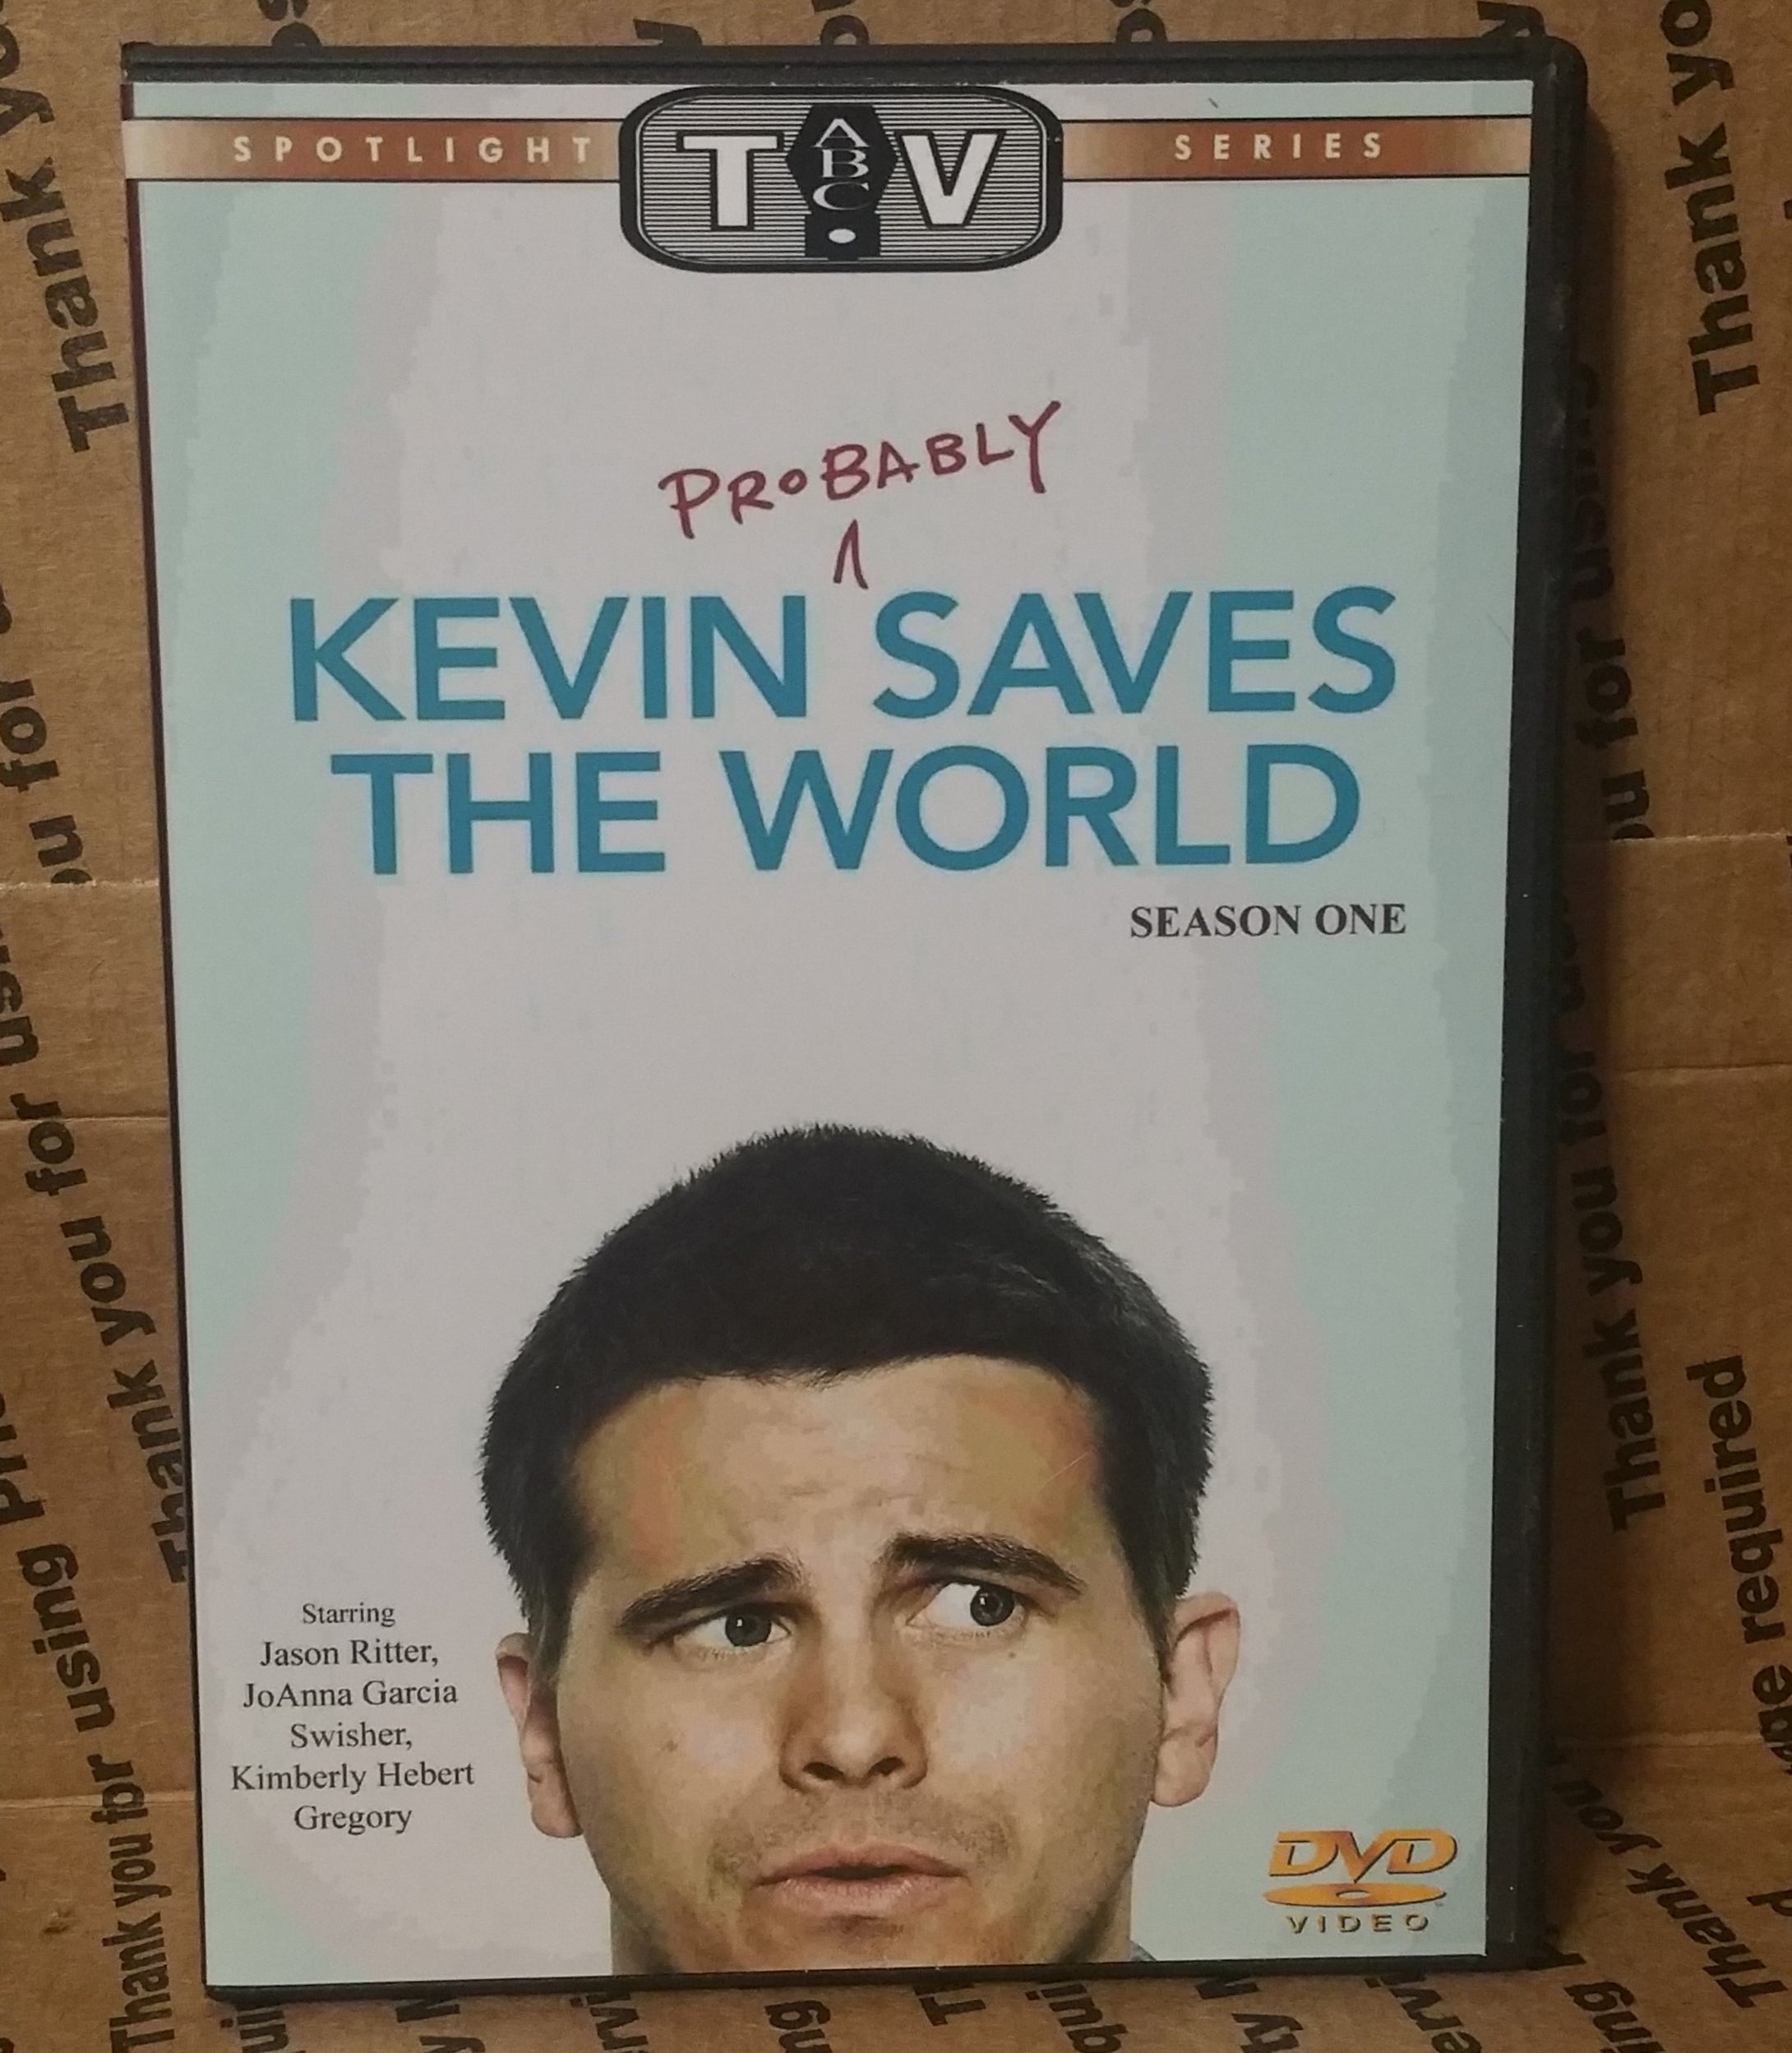 Kevin (Probably) Saves the World [CC] 2017 THE COMPLETE TV SERIES ON DVD Jason Ritter JoAnna Garcia